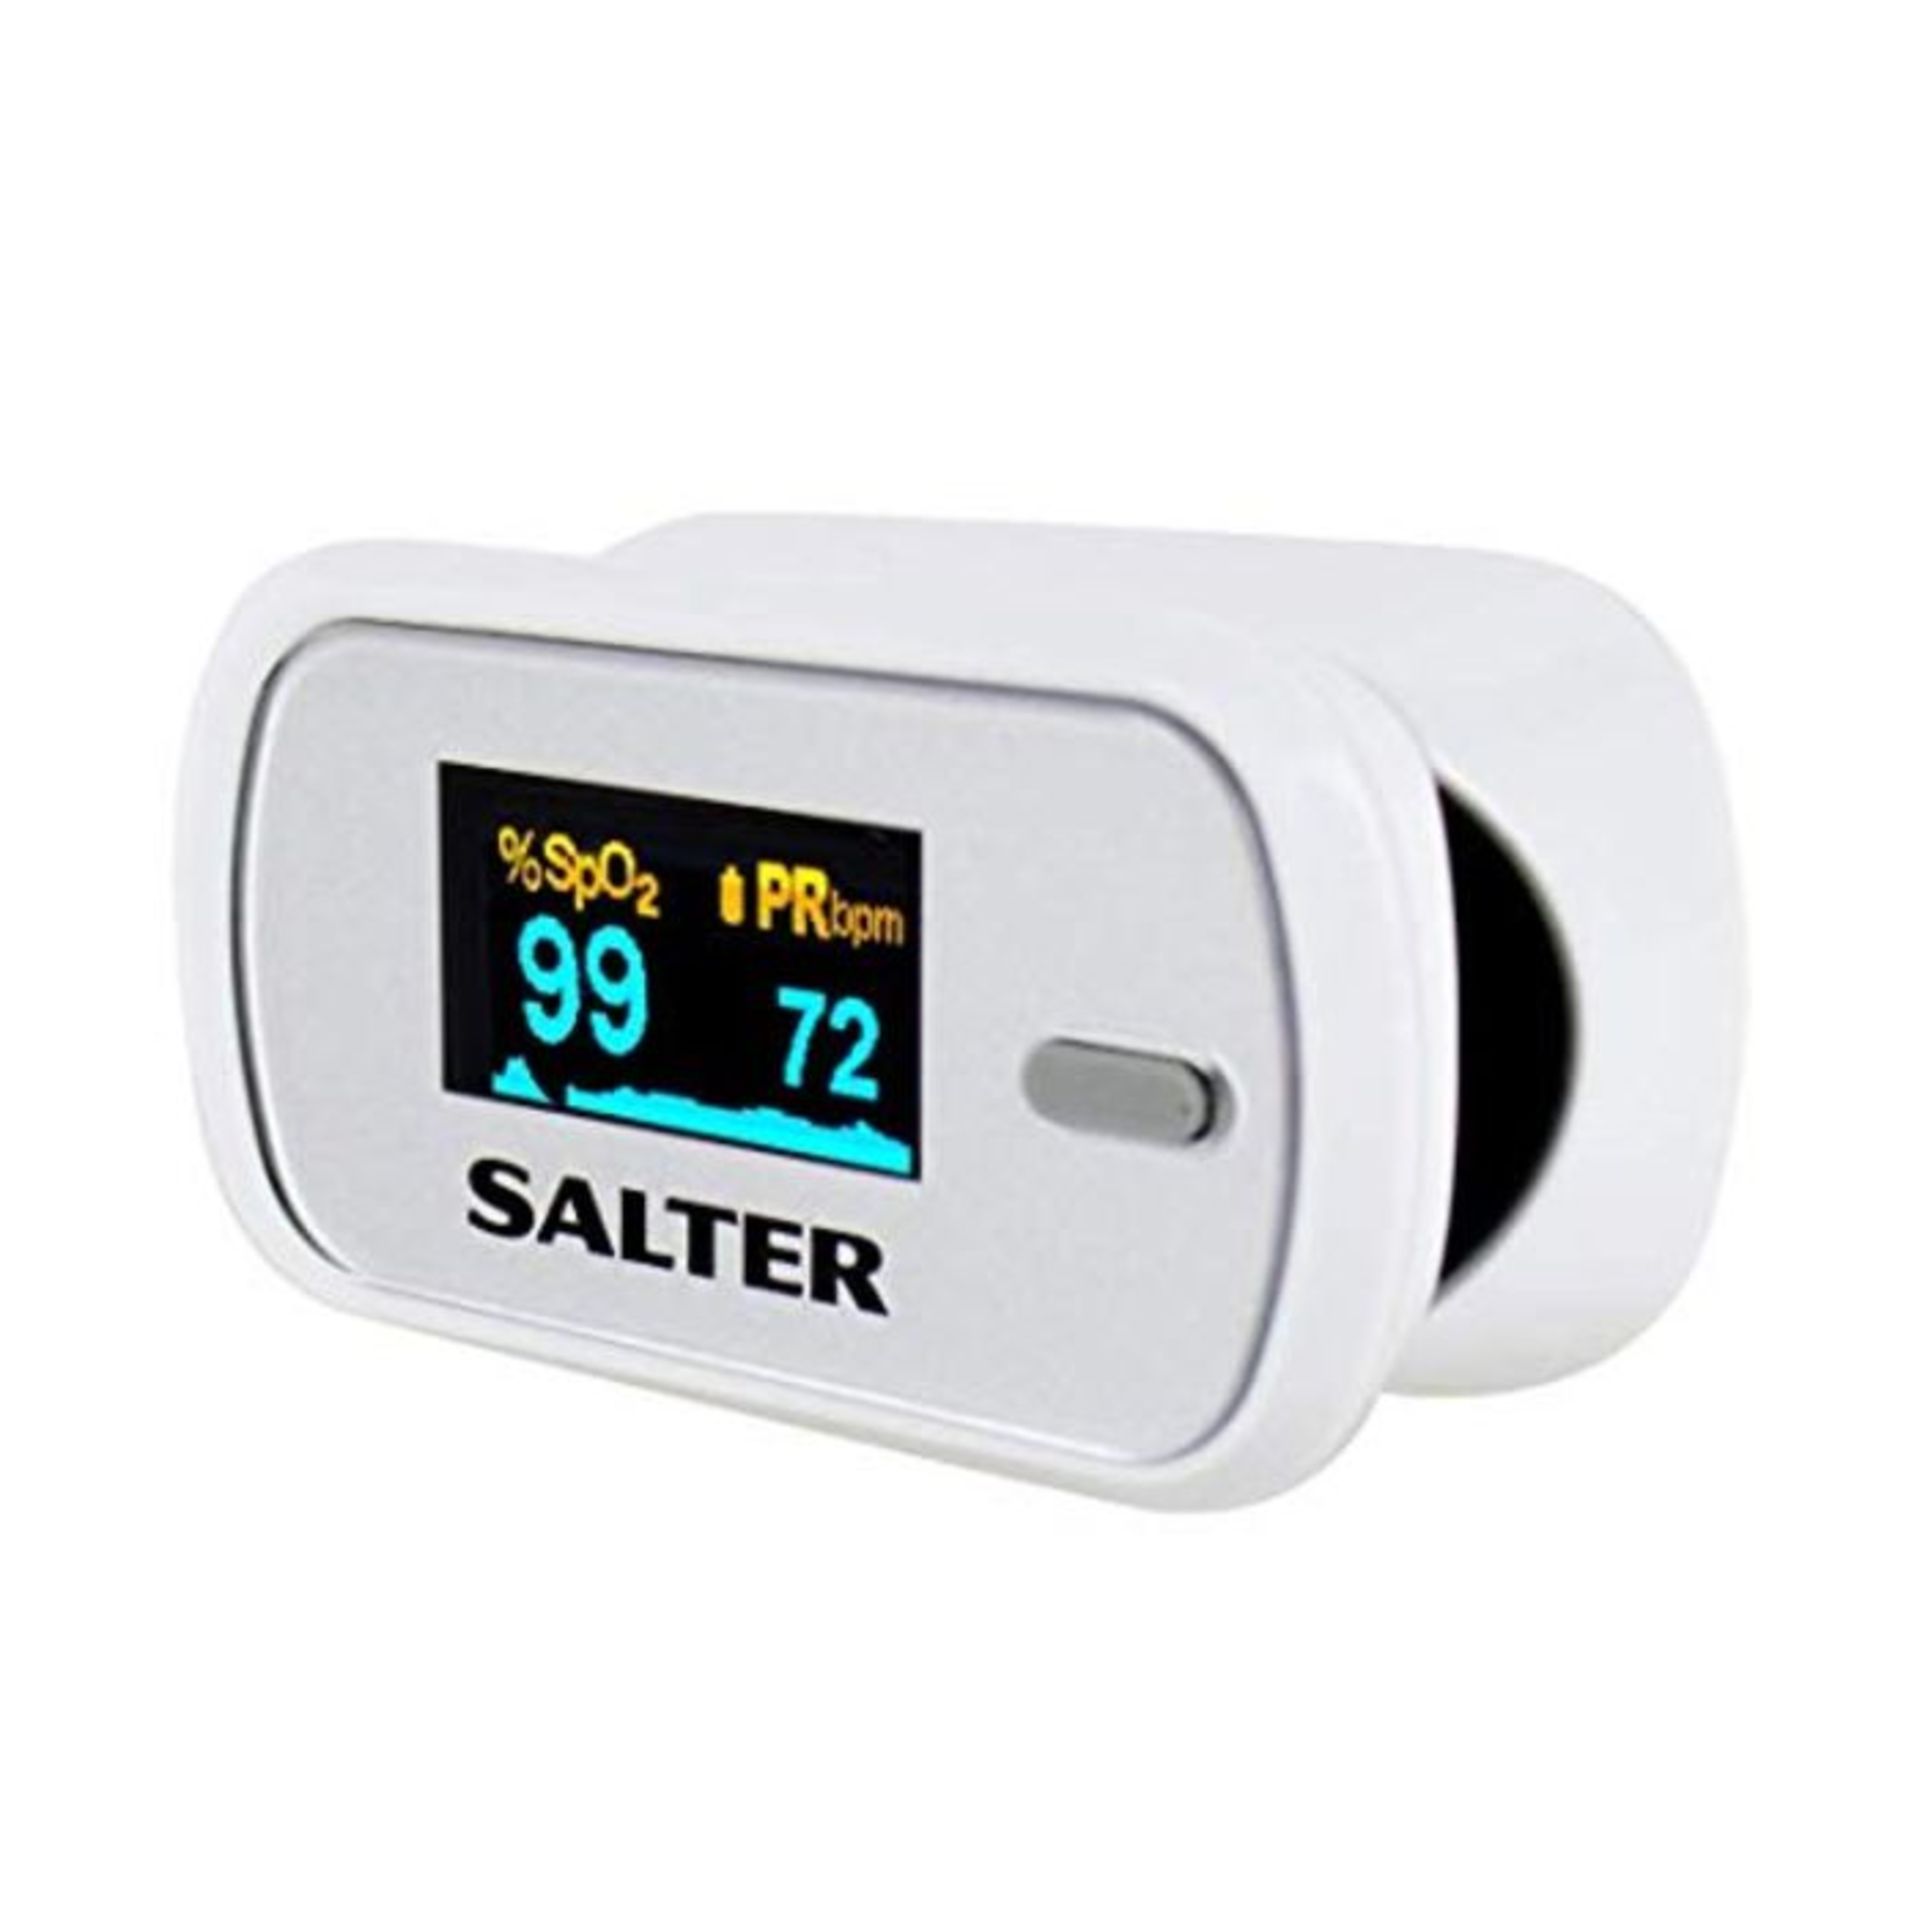 Salter Finger Tip Pulse Oximeter, Measures Oxygen Saturation, Pulse Rate, Perfusion In